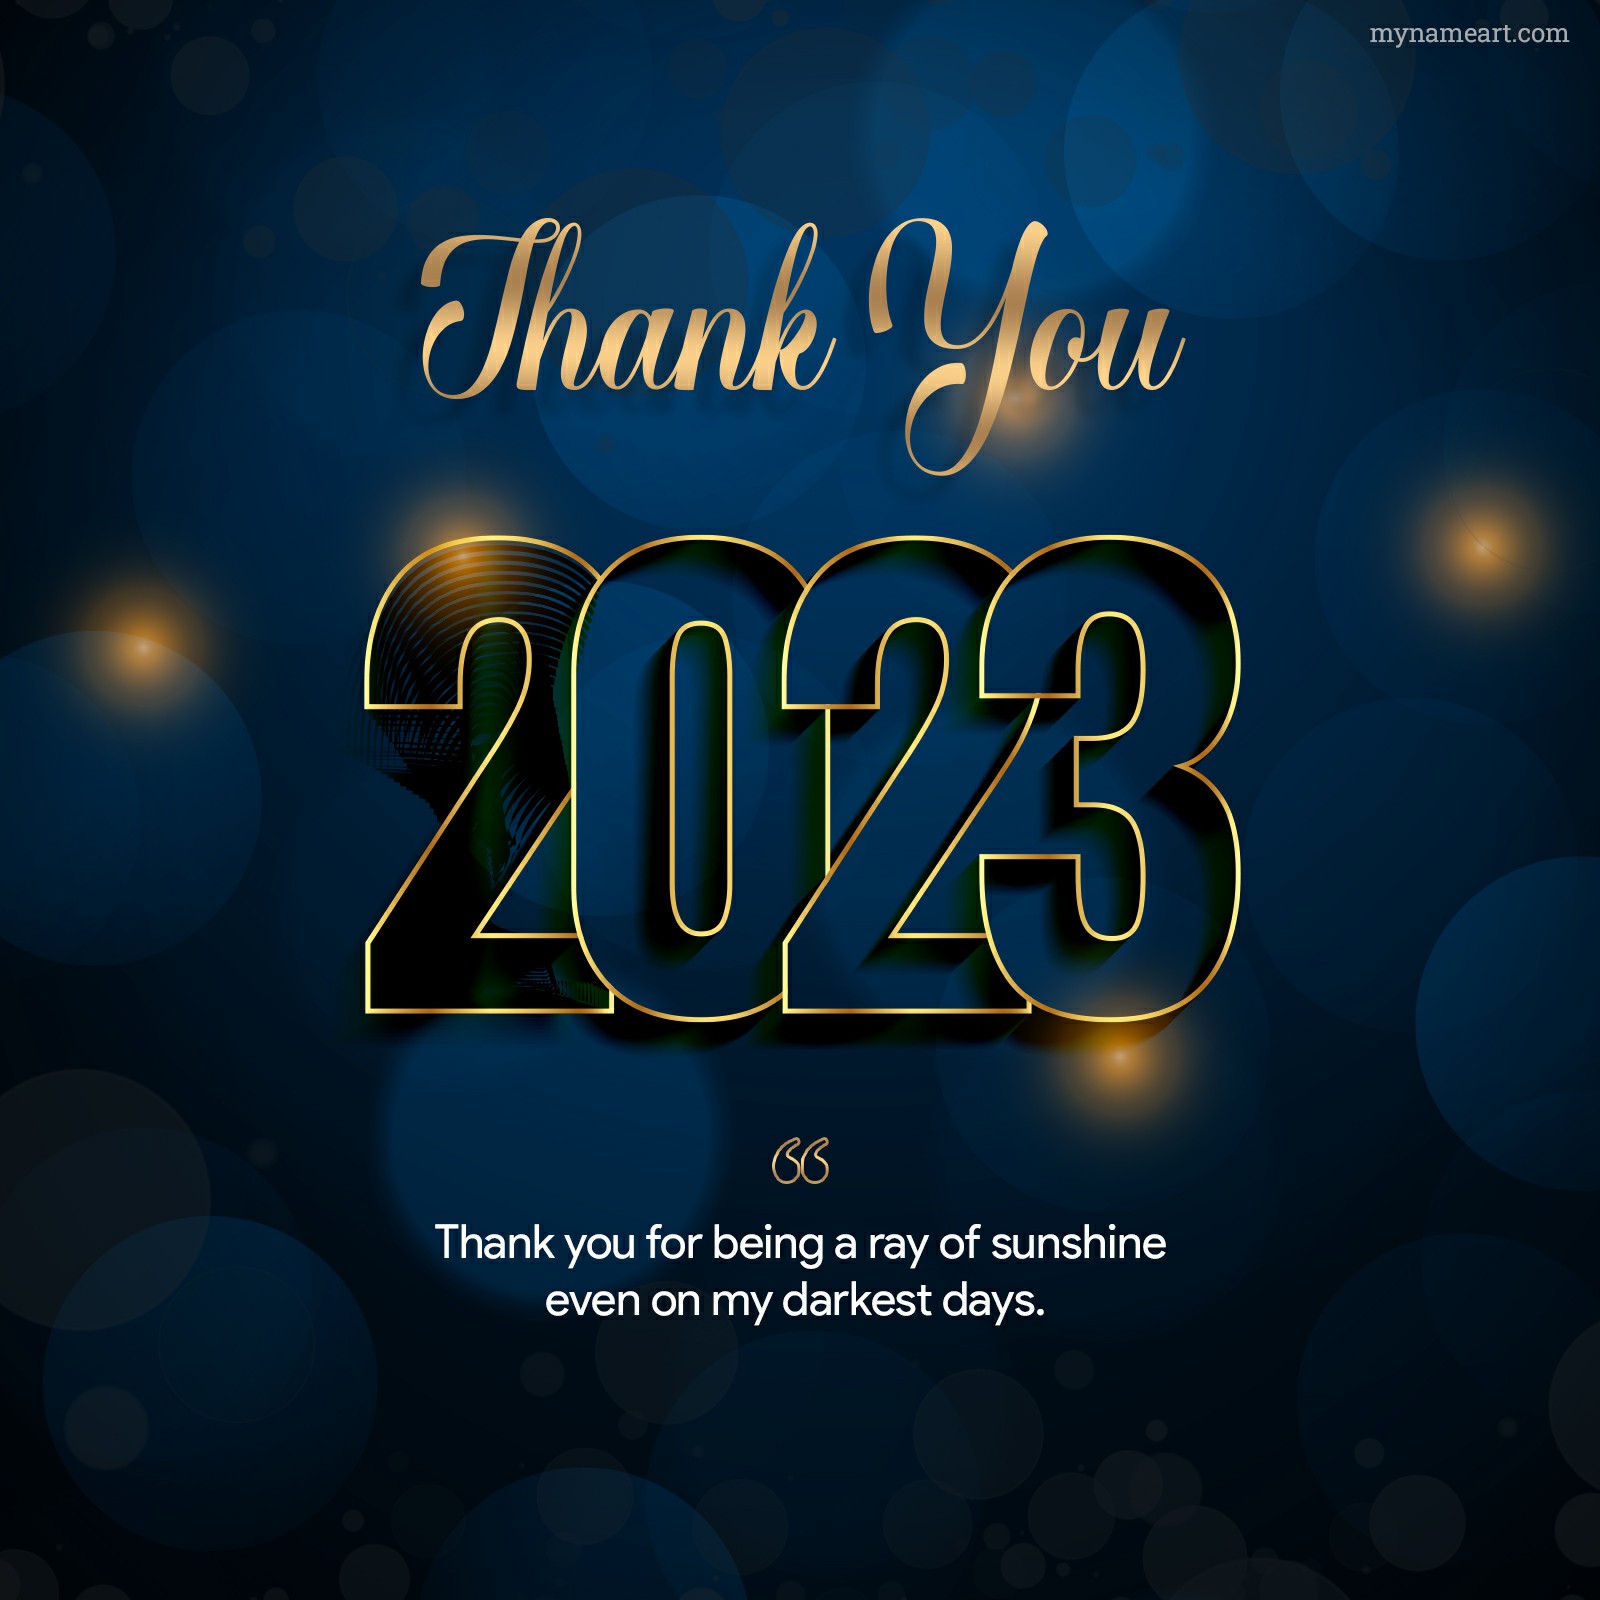 thank you 2022